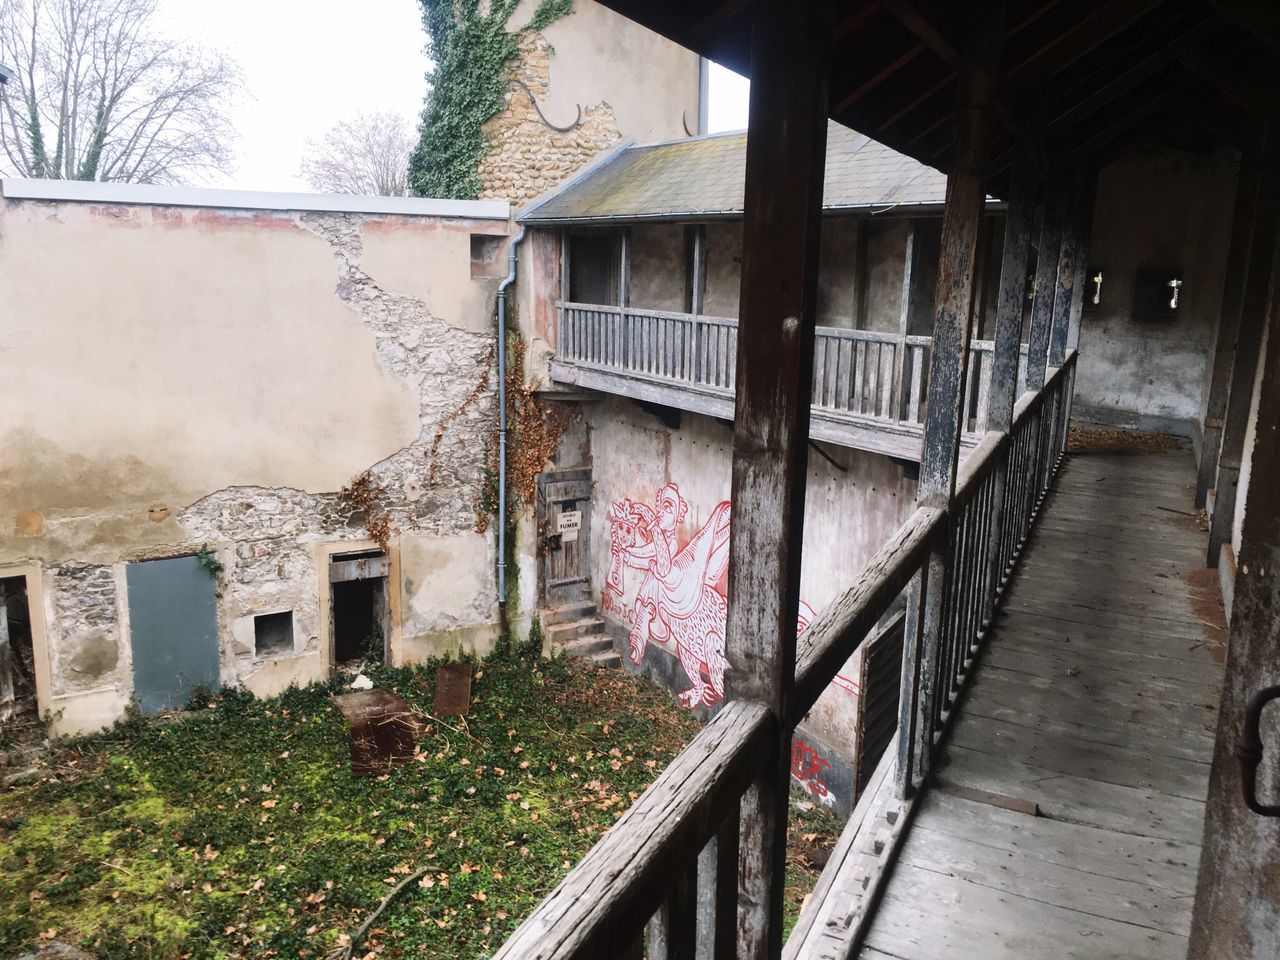 architecture, built structure, building exterior, house, abandoned, residential structure, window, plant, residential building, obsolete, old, day, damaged, building, railing, no people, deterioration, bad condition, graffiti, run-down